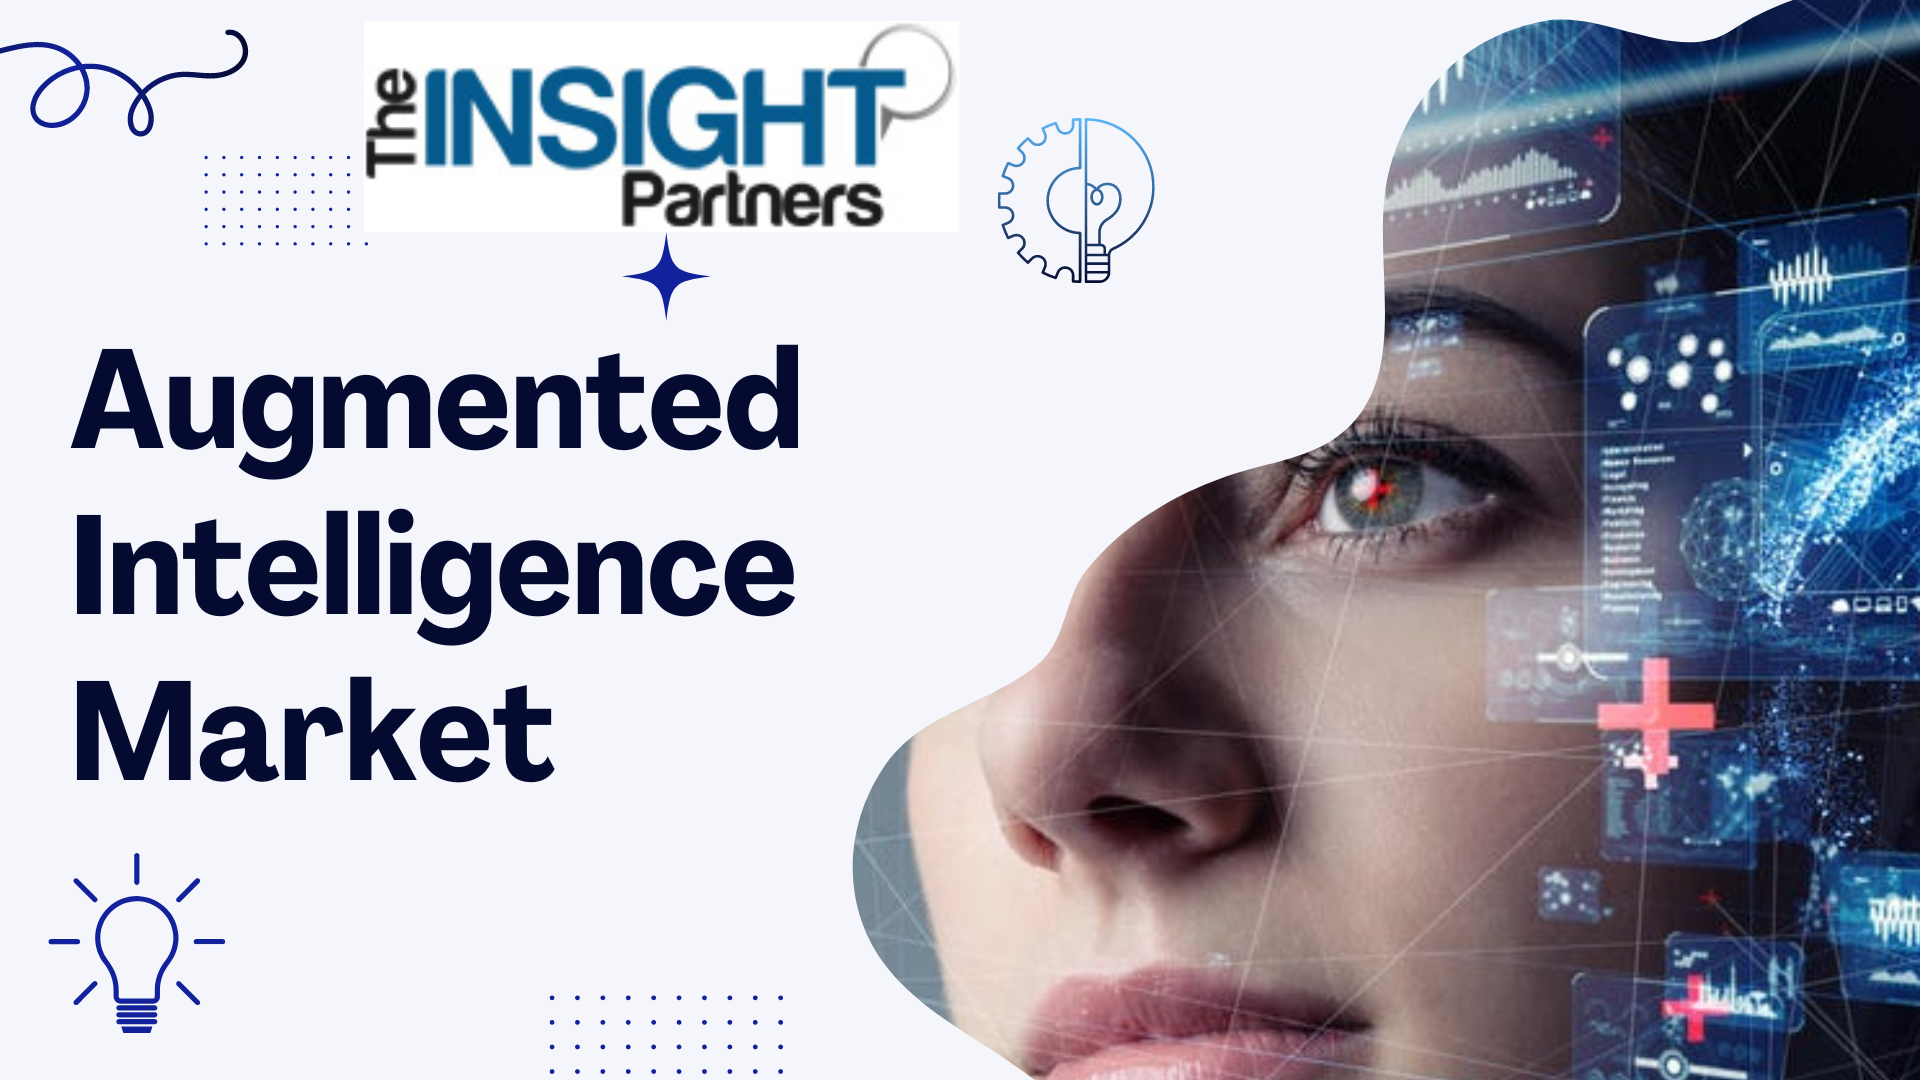 Augmented Intelligence Market Forecast Trends and Forecast up to 2027